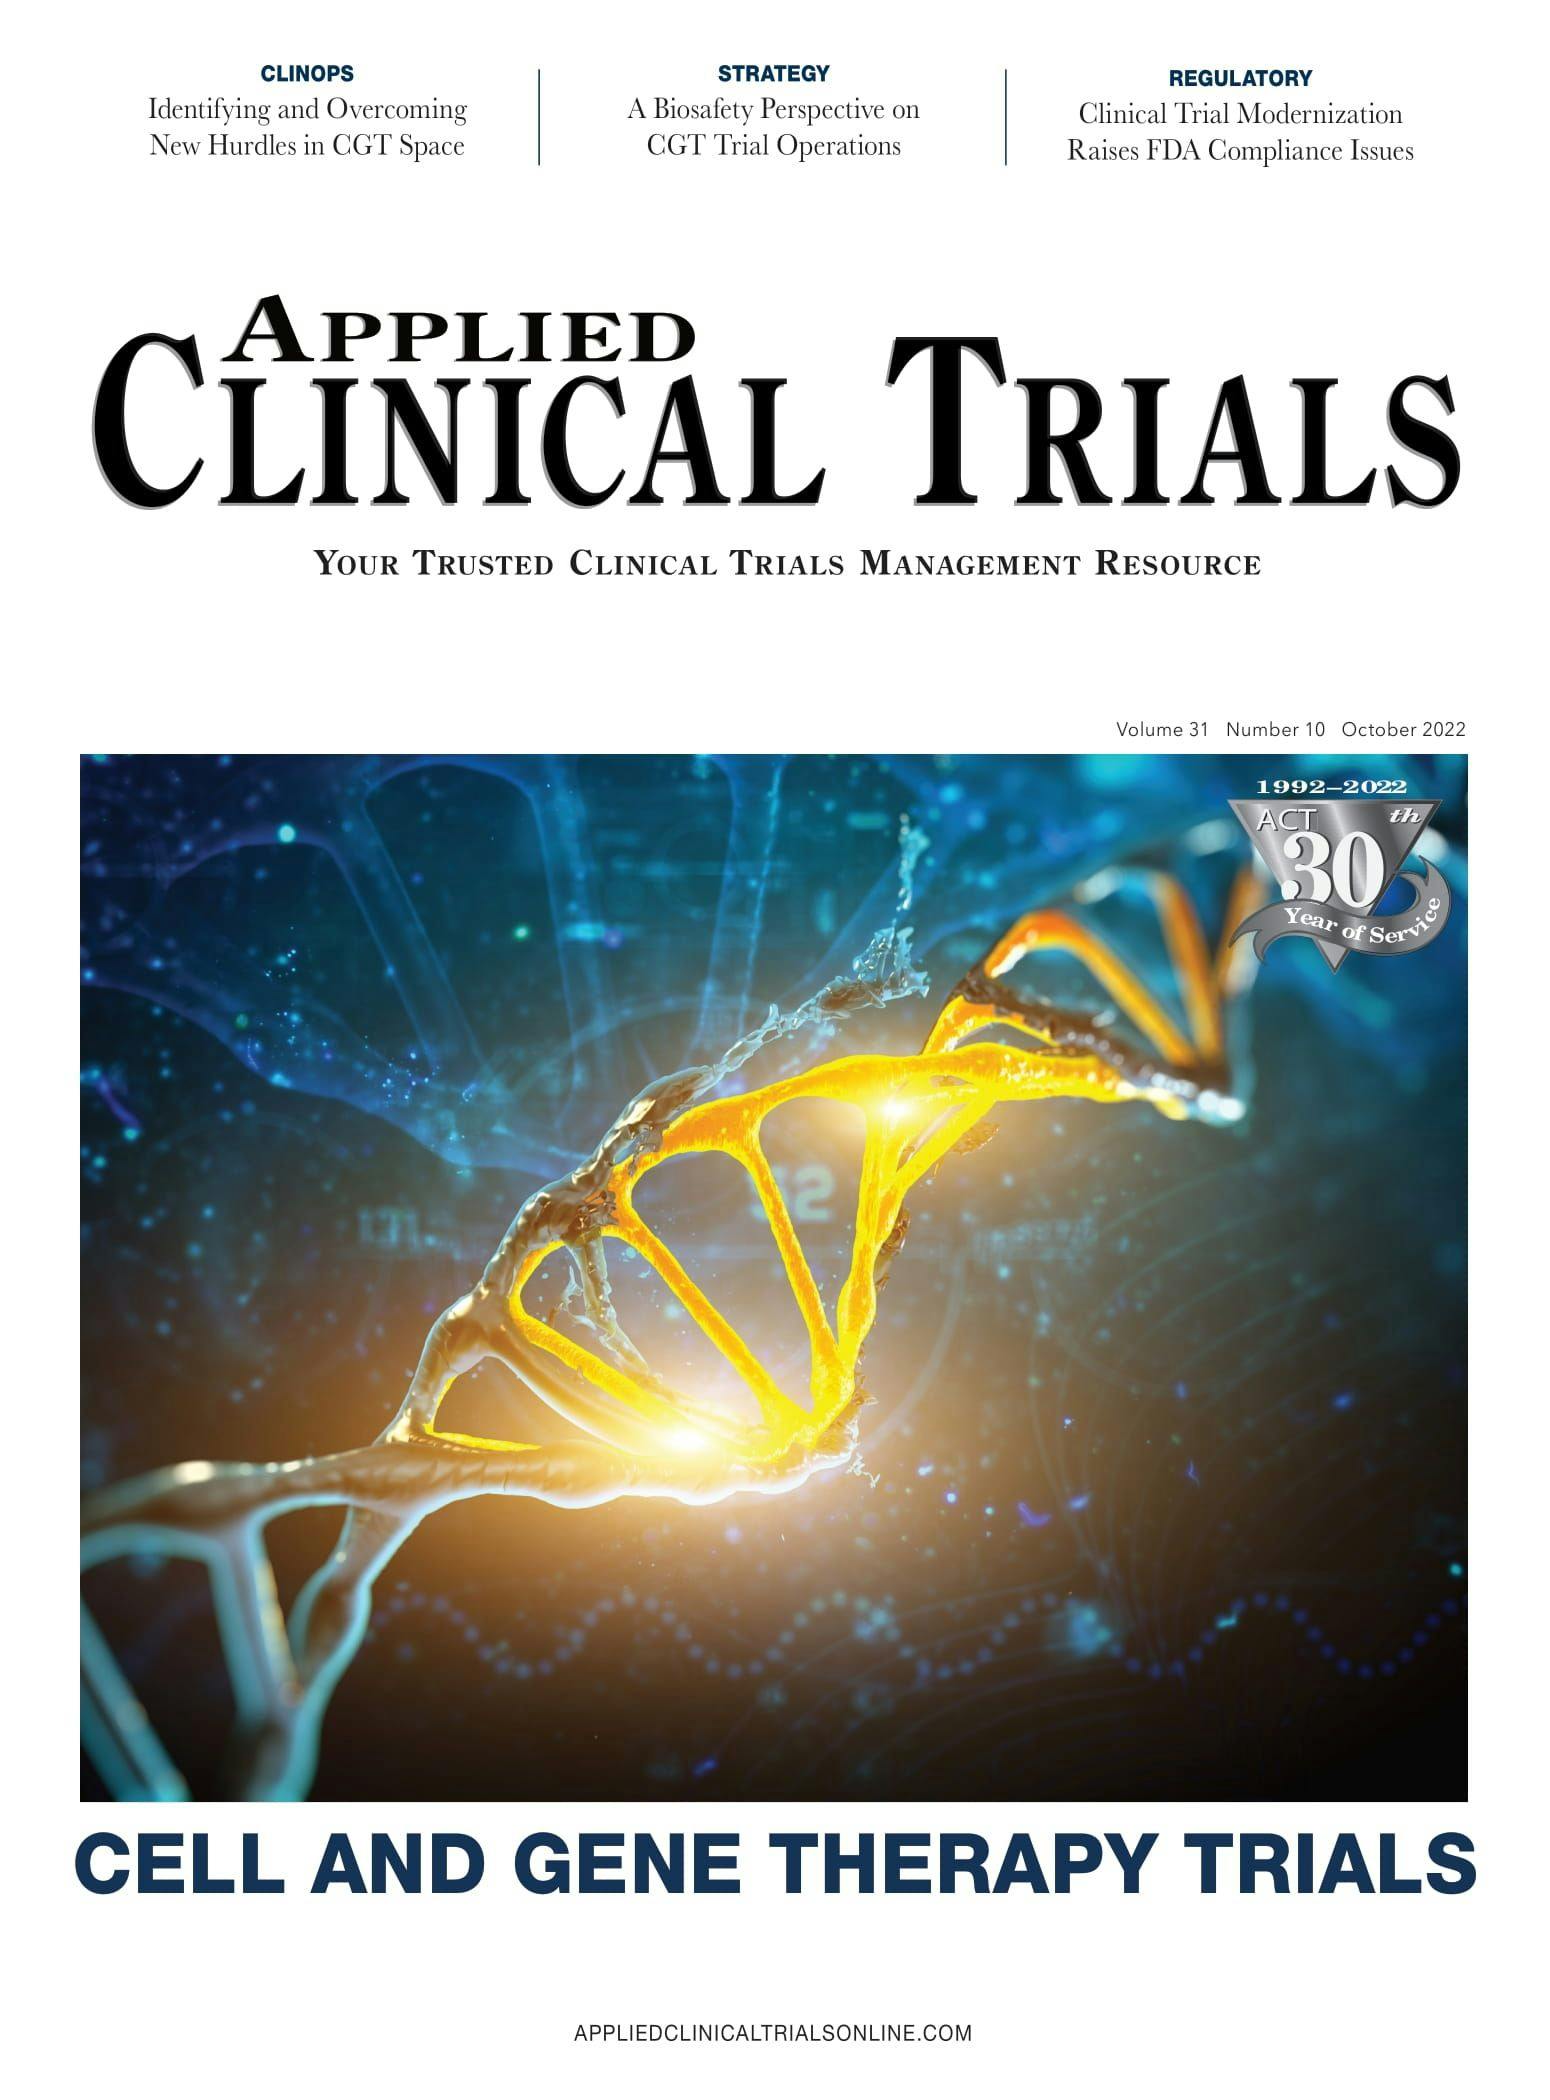 Applied Clinical Trials-10-01-2022